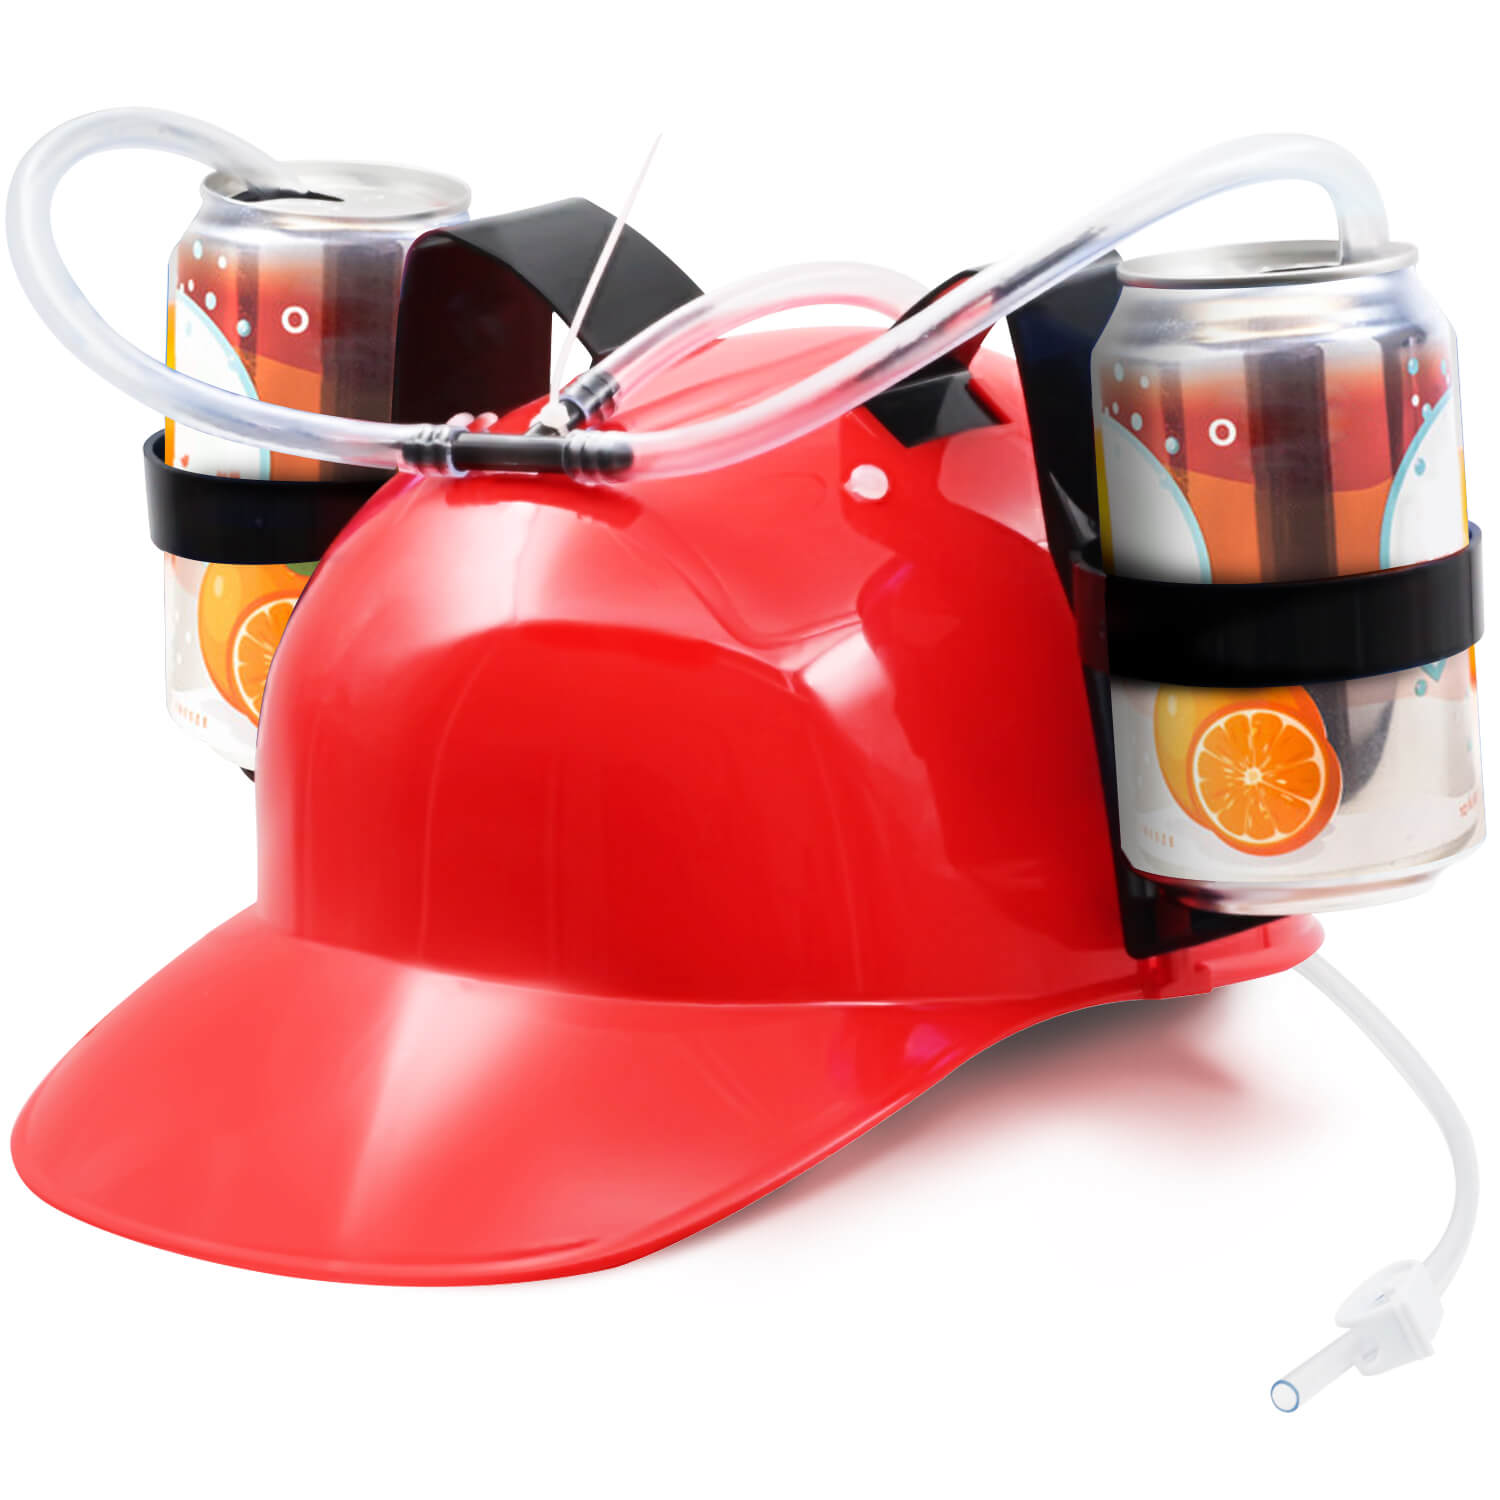 Red Party Hat Novelty Gift Toys Perfect White Elephant Gift Wenini Beer & Soda Guzzler Helmet & Drinking Hat Adjustable Strap to Fit All 